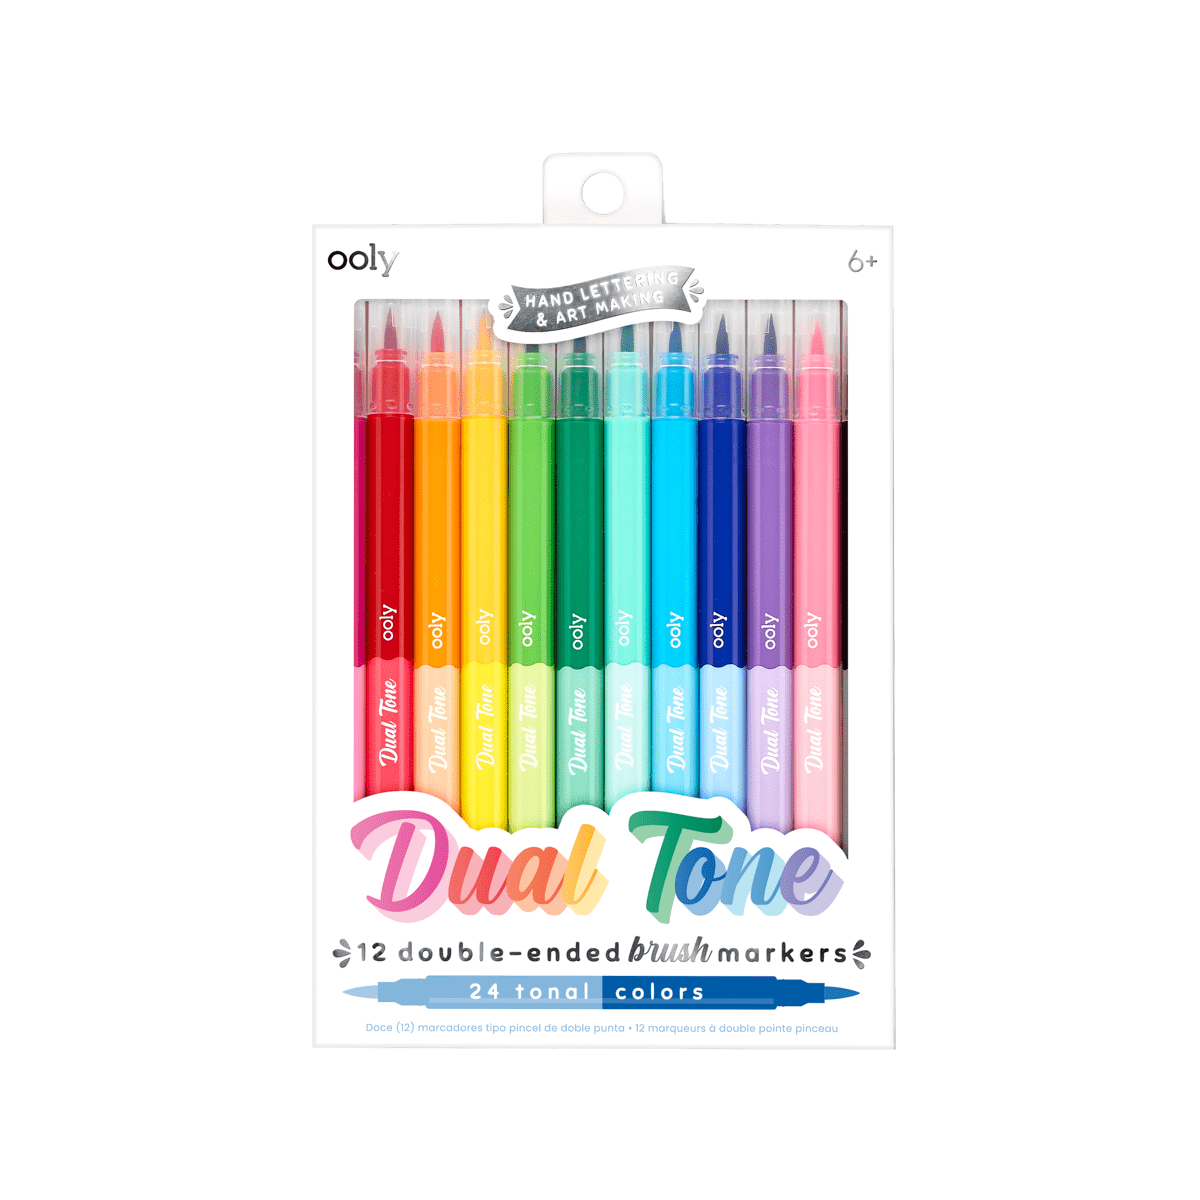 https://cdn.shopify.com/s/files/1/1225/1748/products/810078036722-ooly-dual-tone-double-ended-brush-marker-set-of-12-24-colors-by-ooly-29018882703435_1600x.png?v=1696356044